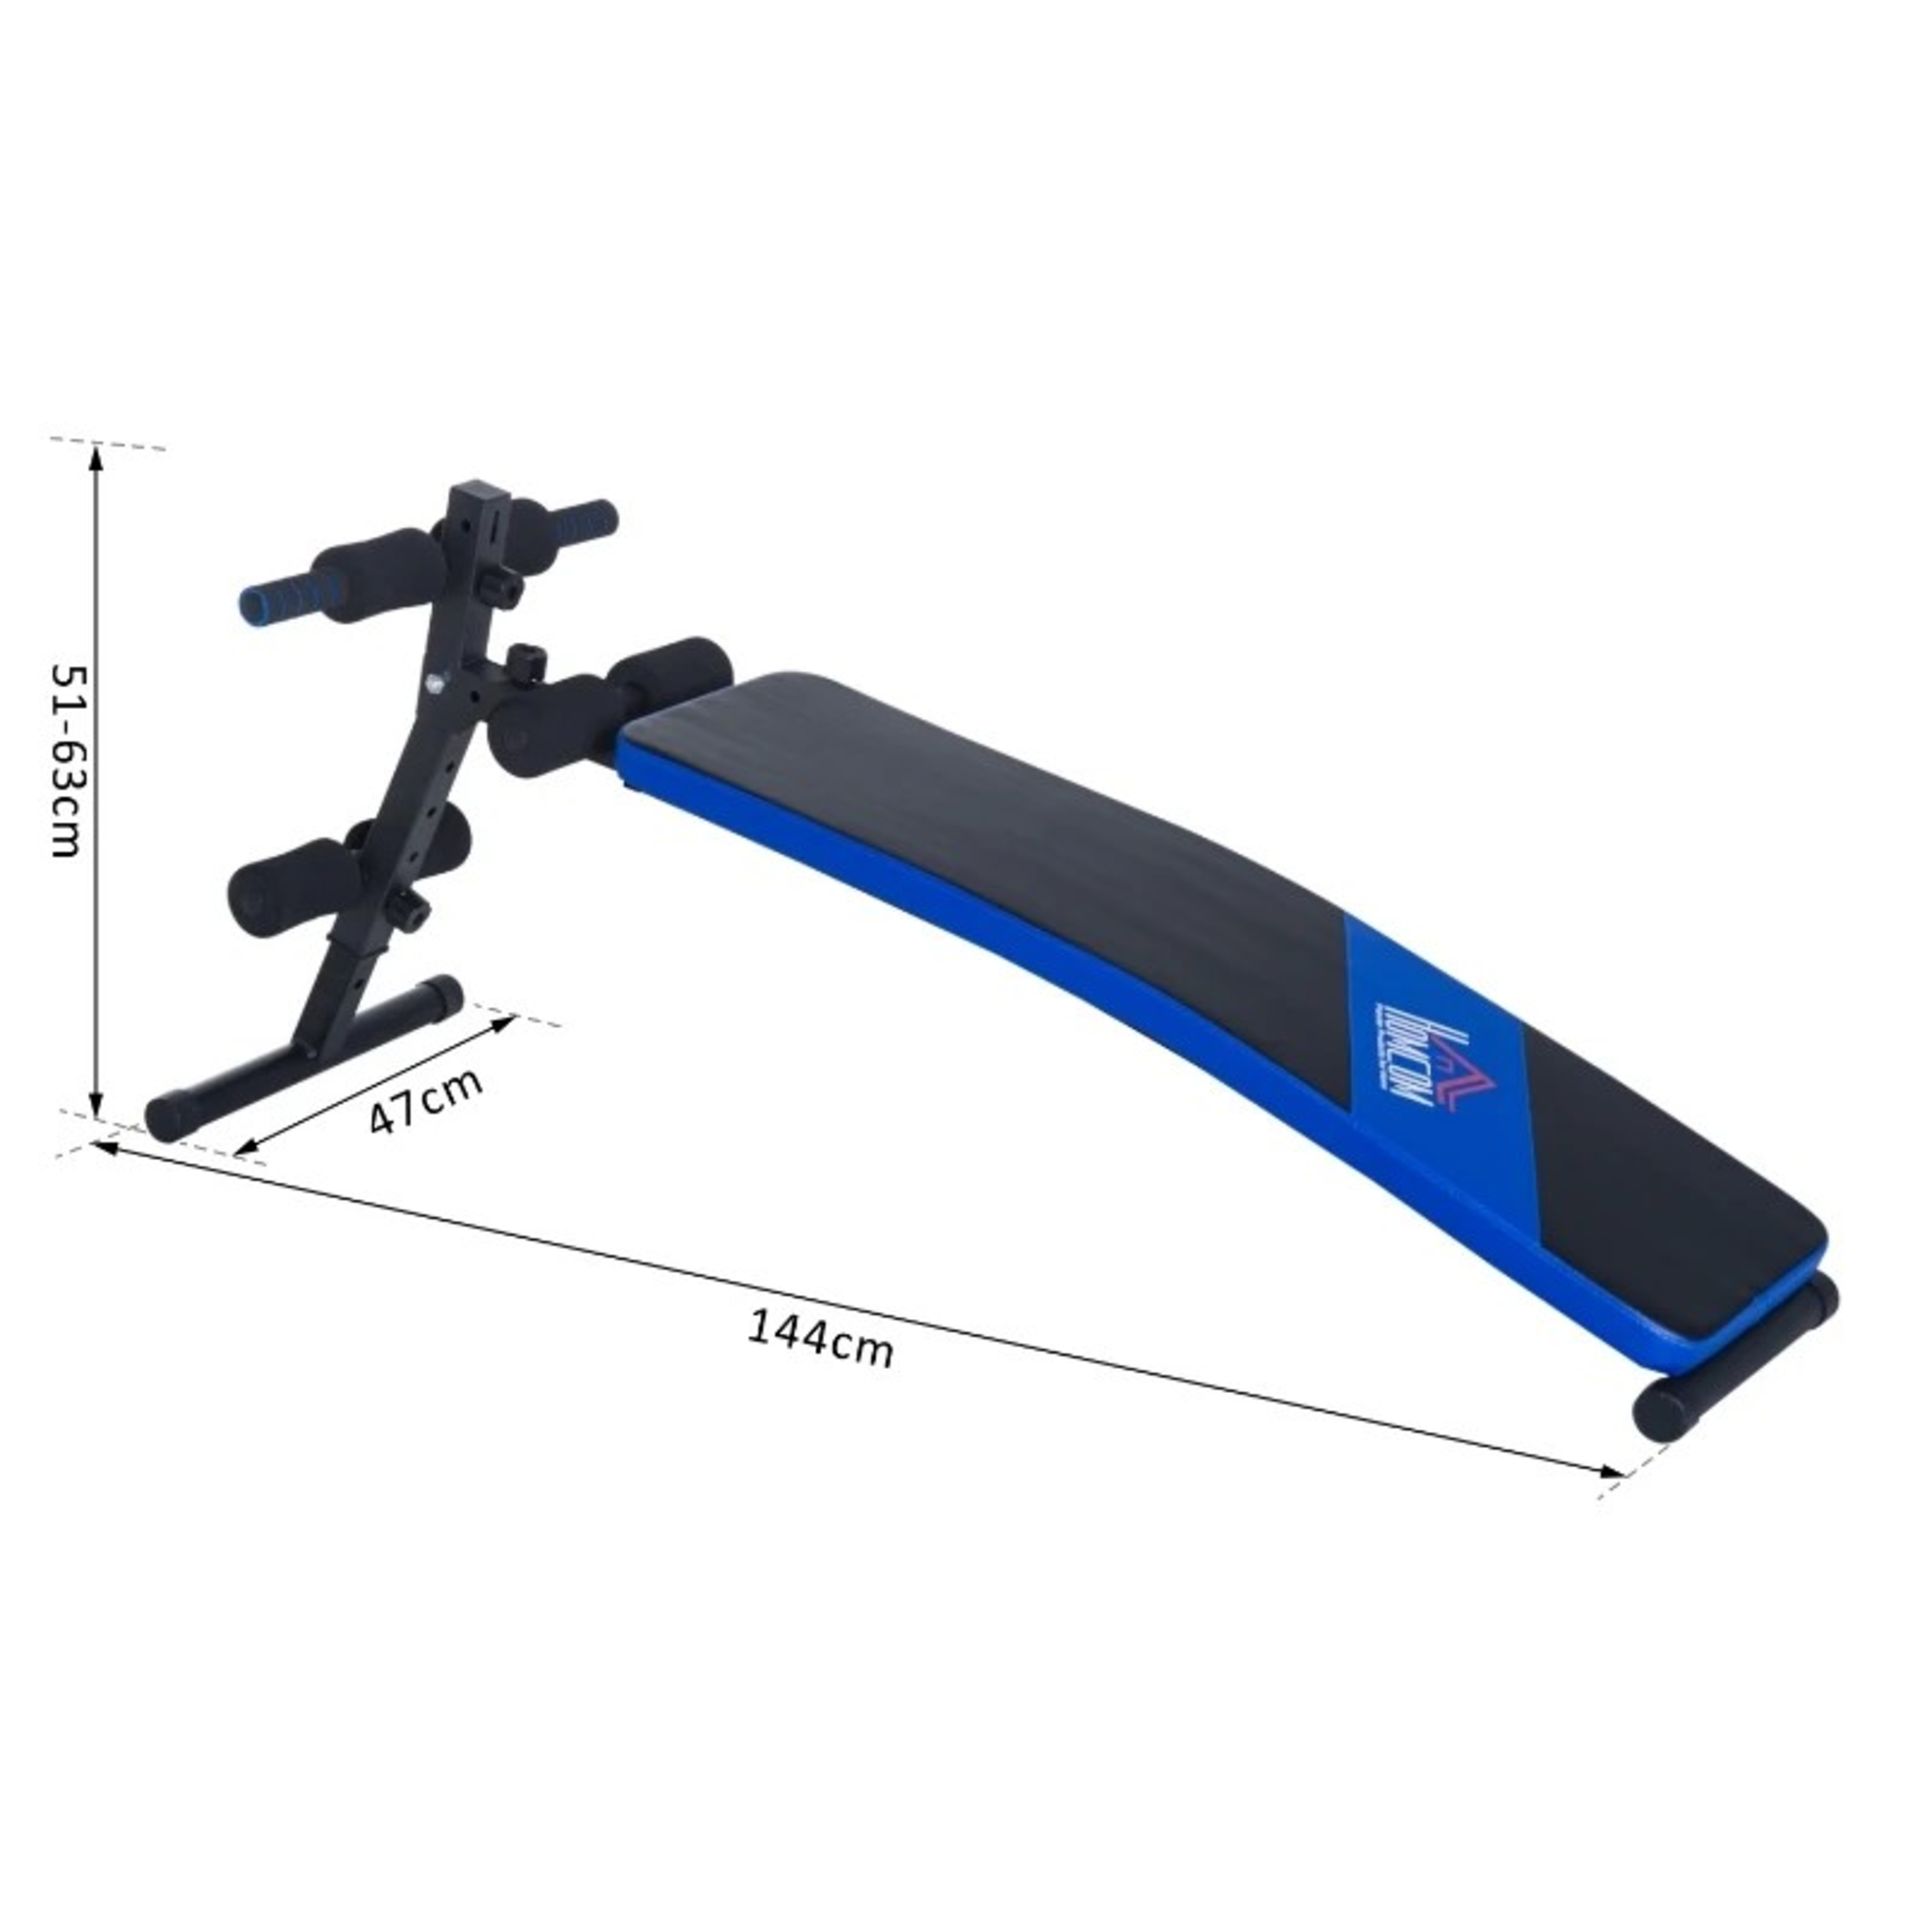 RRP £52.99 - Sit-up Workout Bench, Steel-Black/Blue - Overall Size: 144L x 47W x 51-63H cm. Assembly - Image 2 of 4